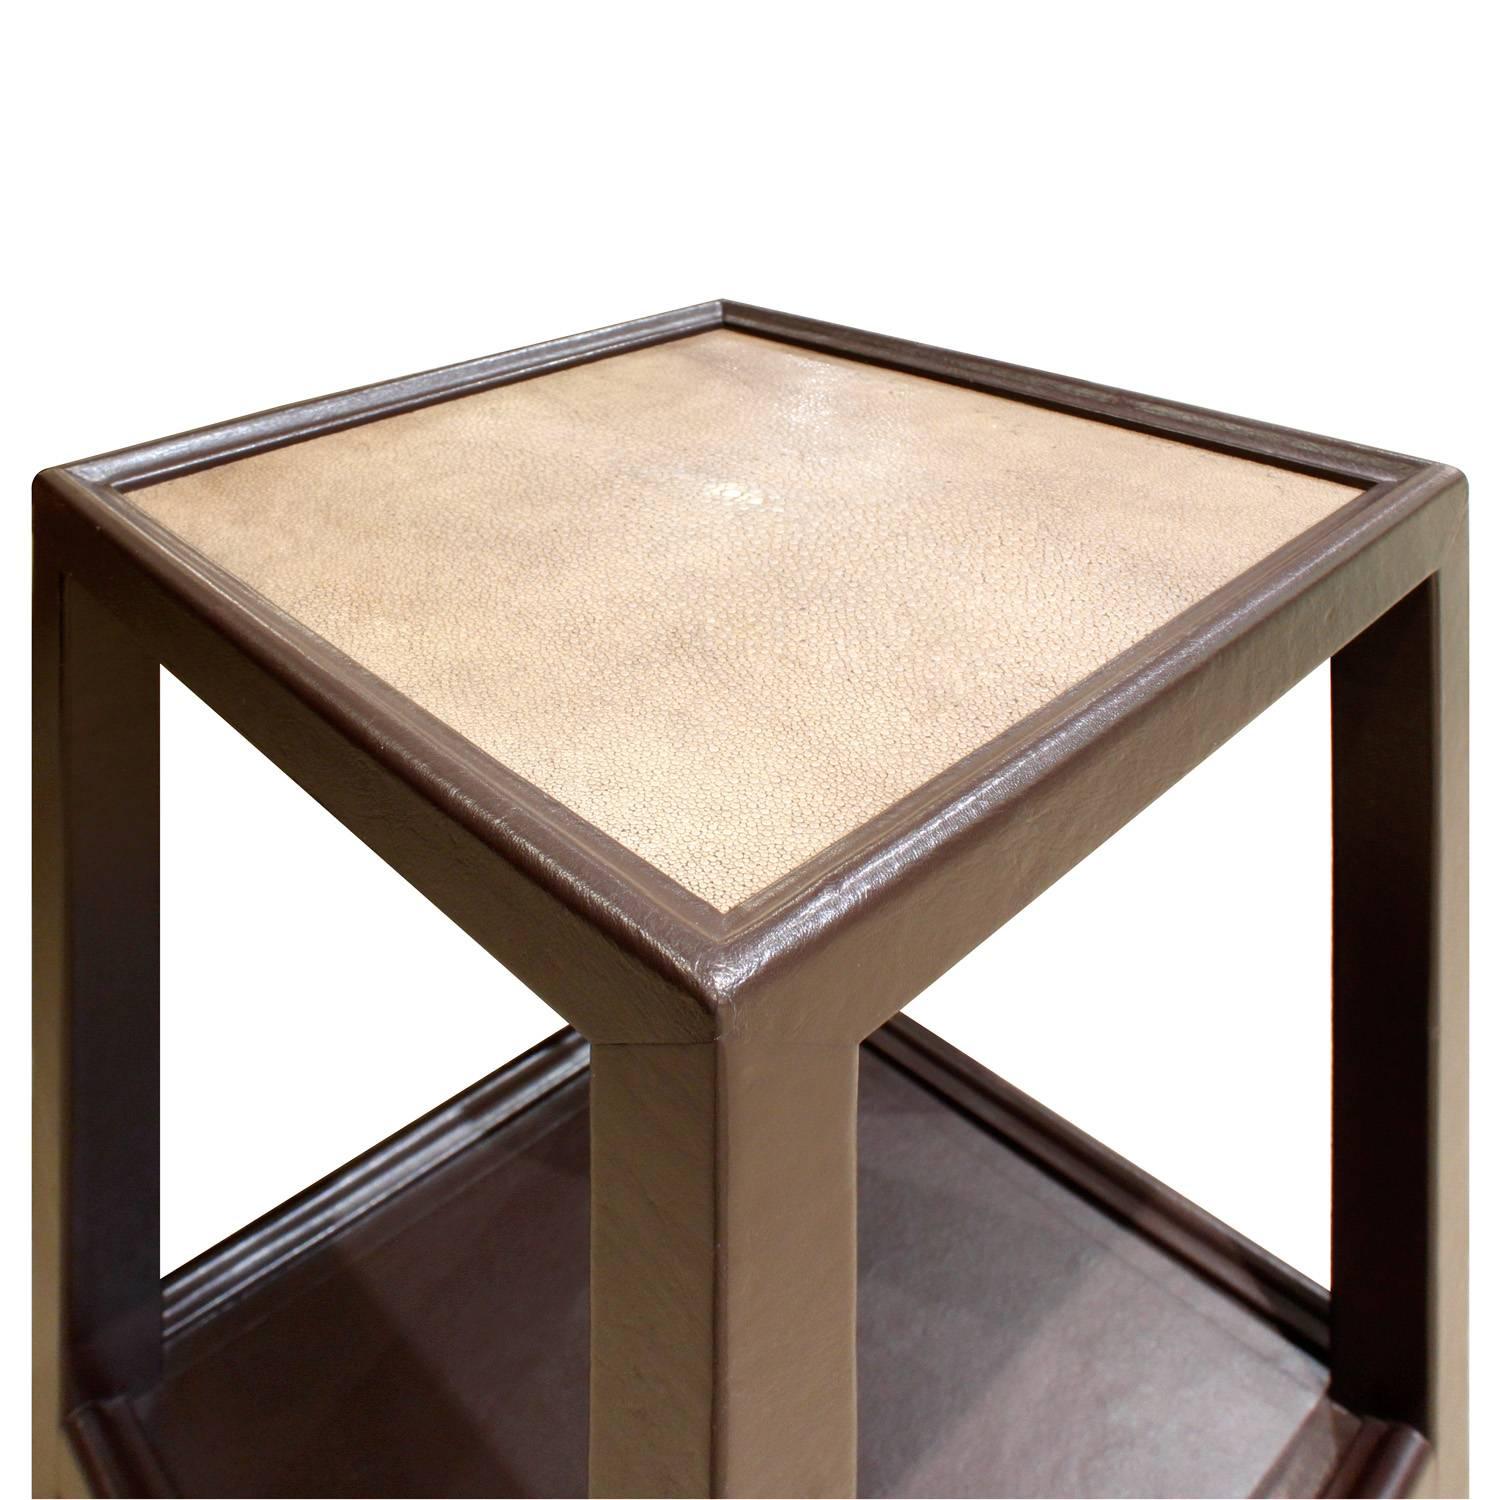 Telephone table shown here in hand-stitched leather with inset shagreen top on polished brass castors designed by Mary Forssberg for Lobel Modern. This table is exceptionally crafted. It can be made in any size and color and in a variety of